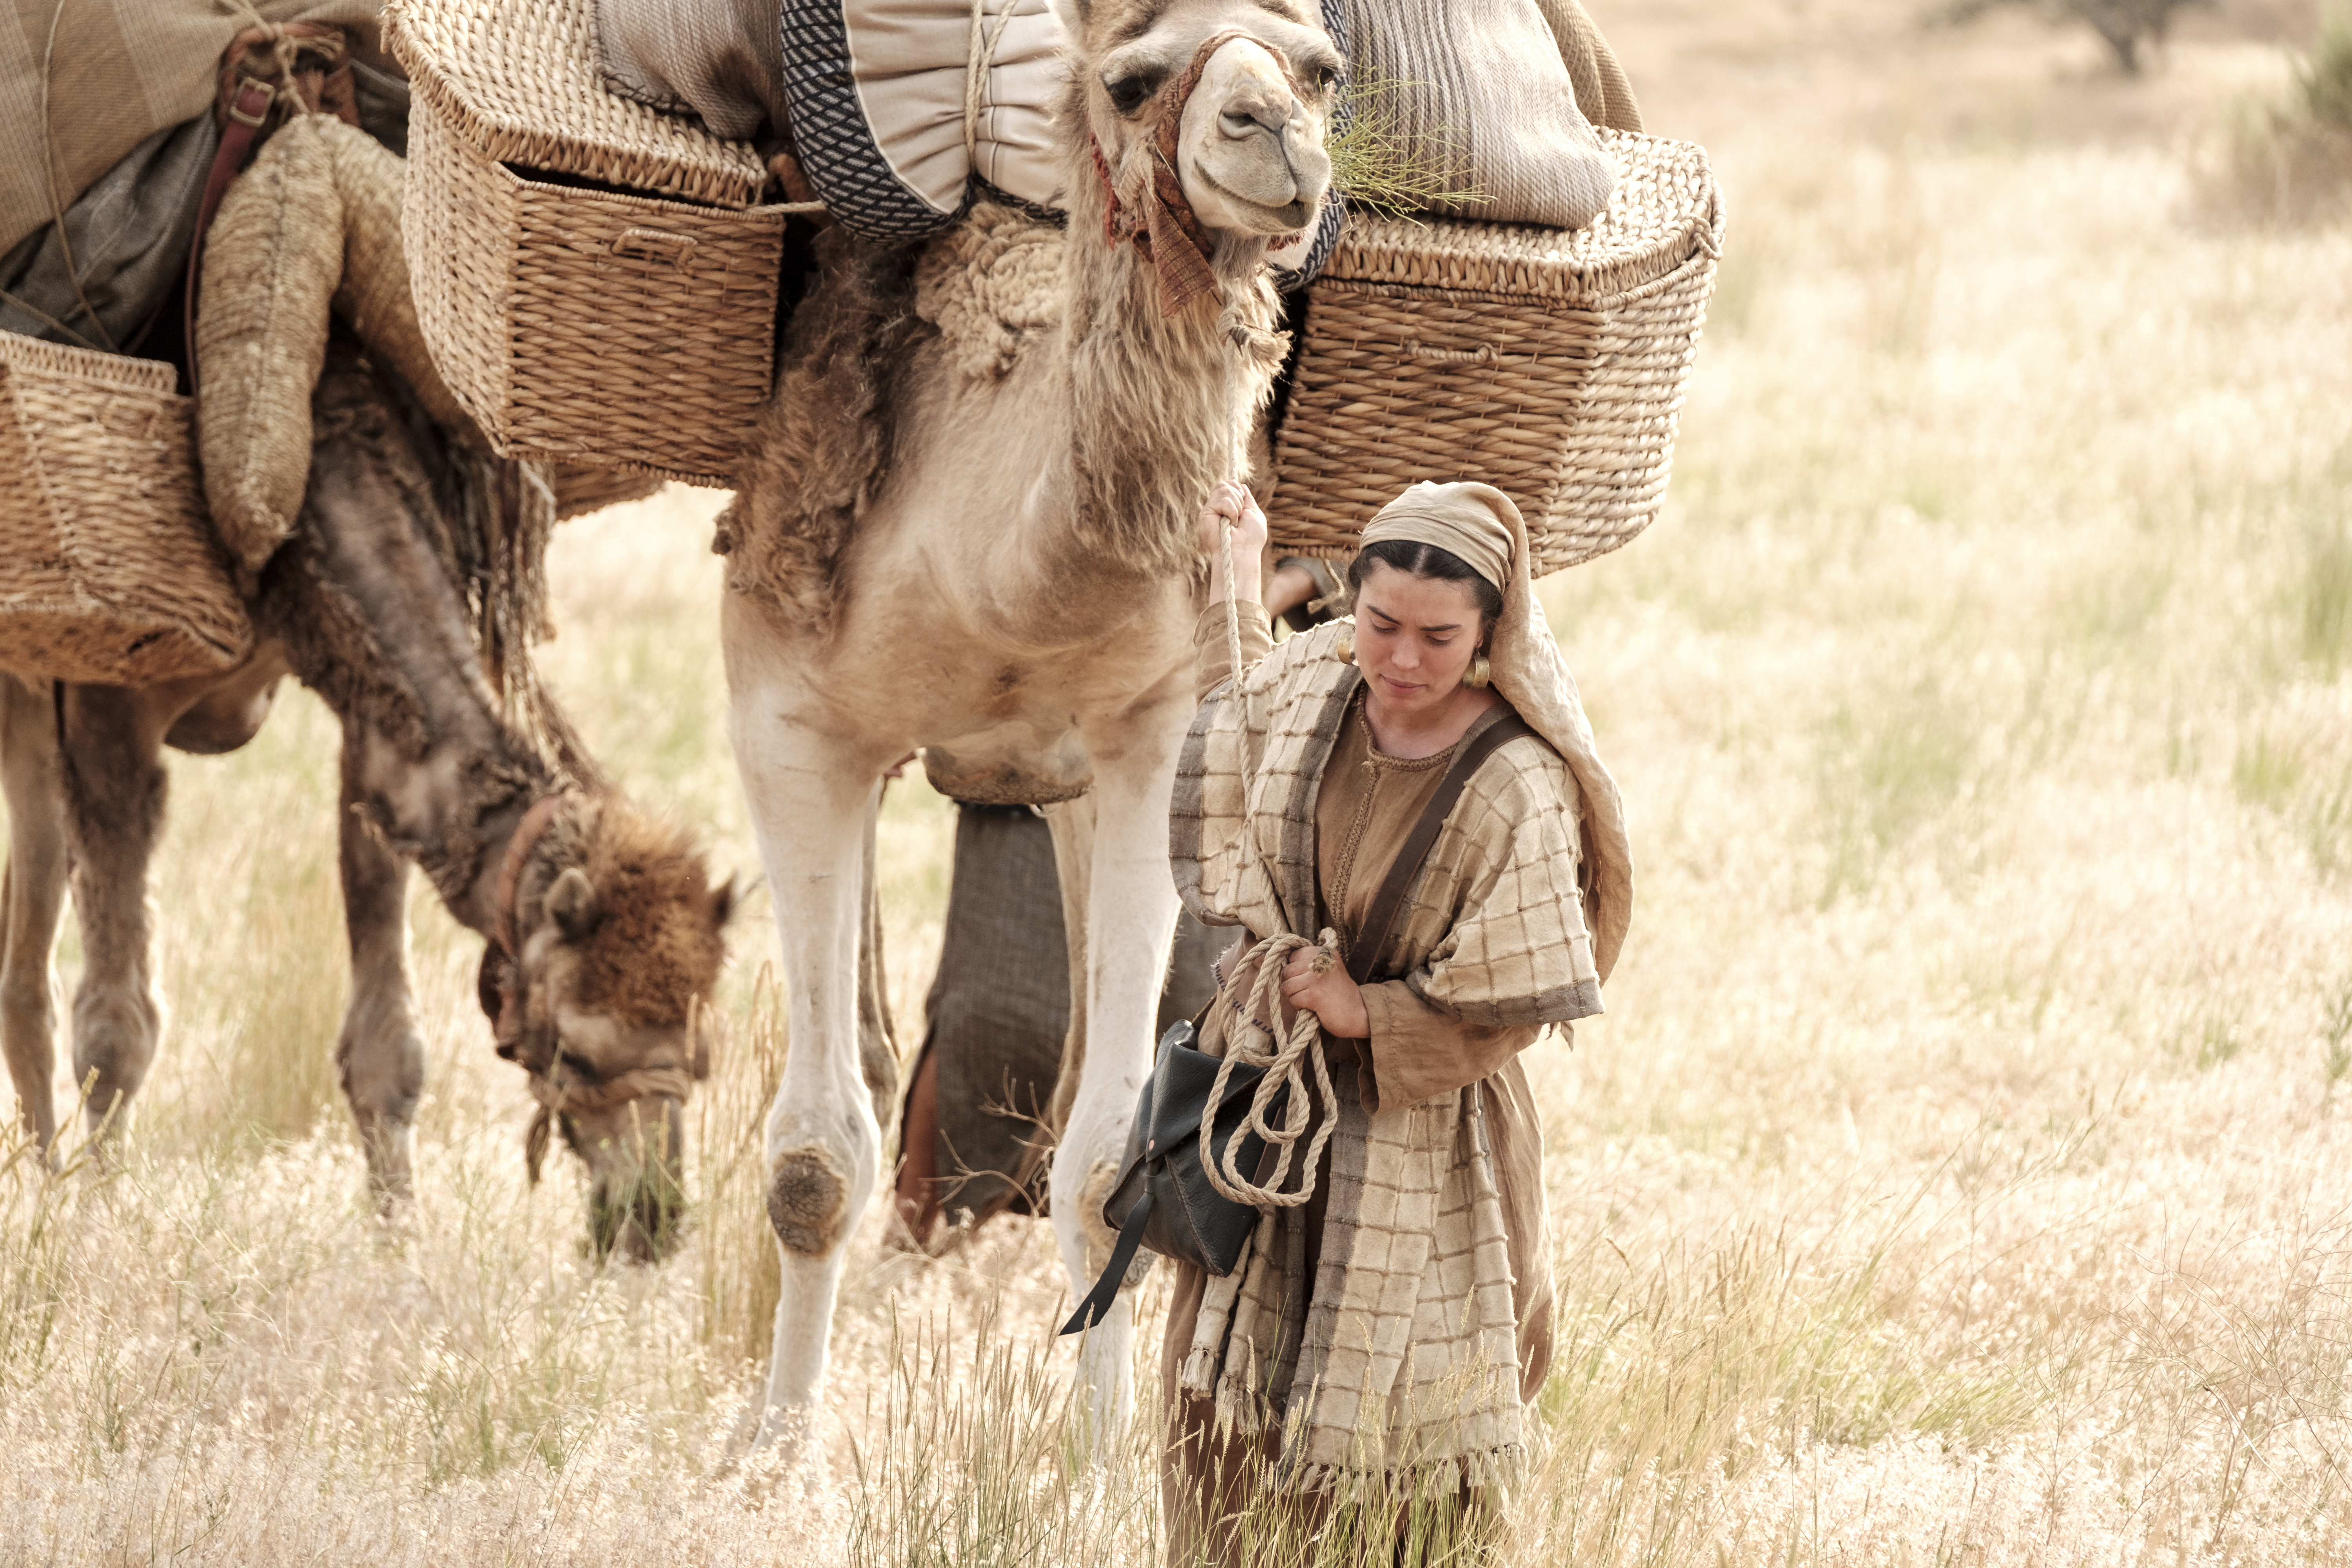 A daughter of Ishmael leading a camel in the wilderness.